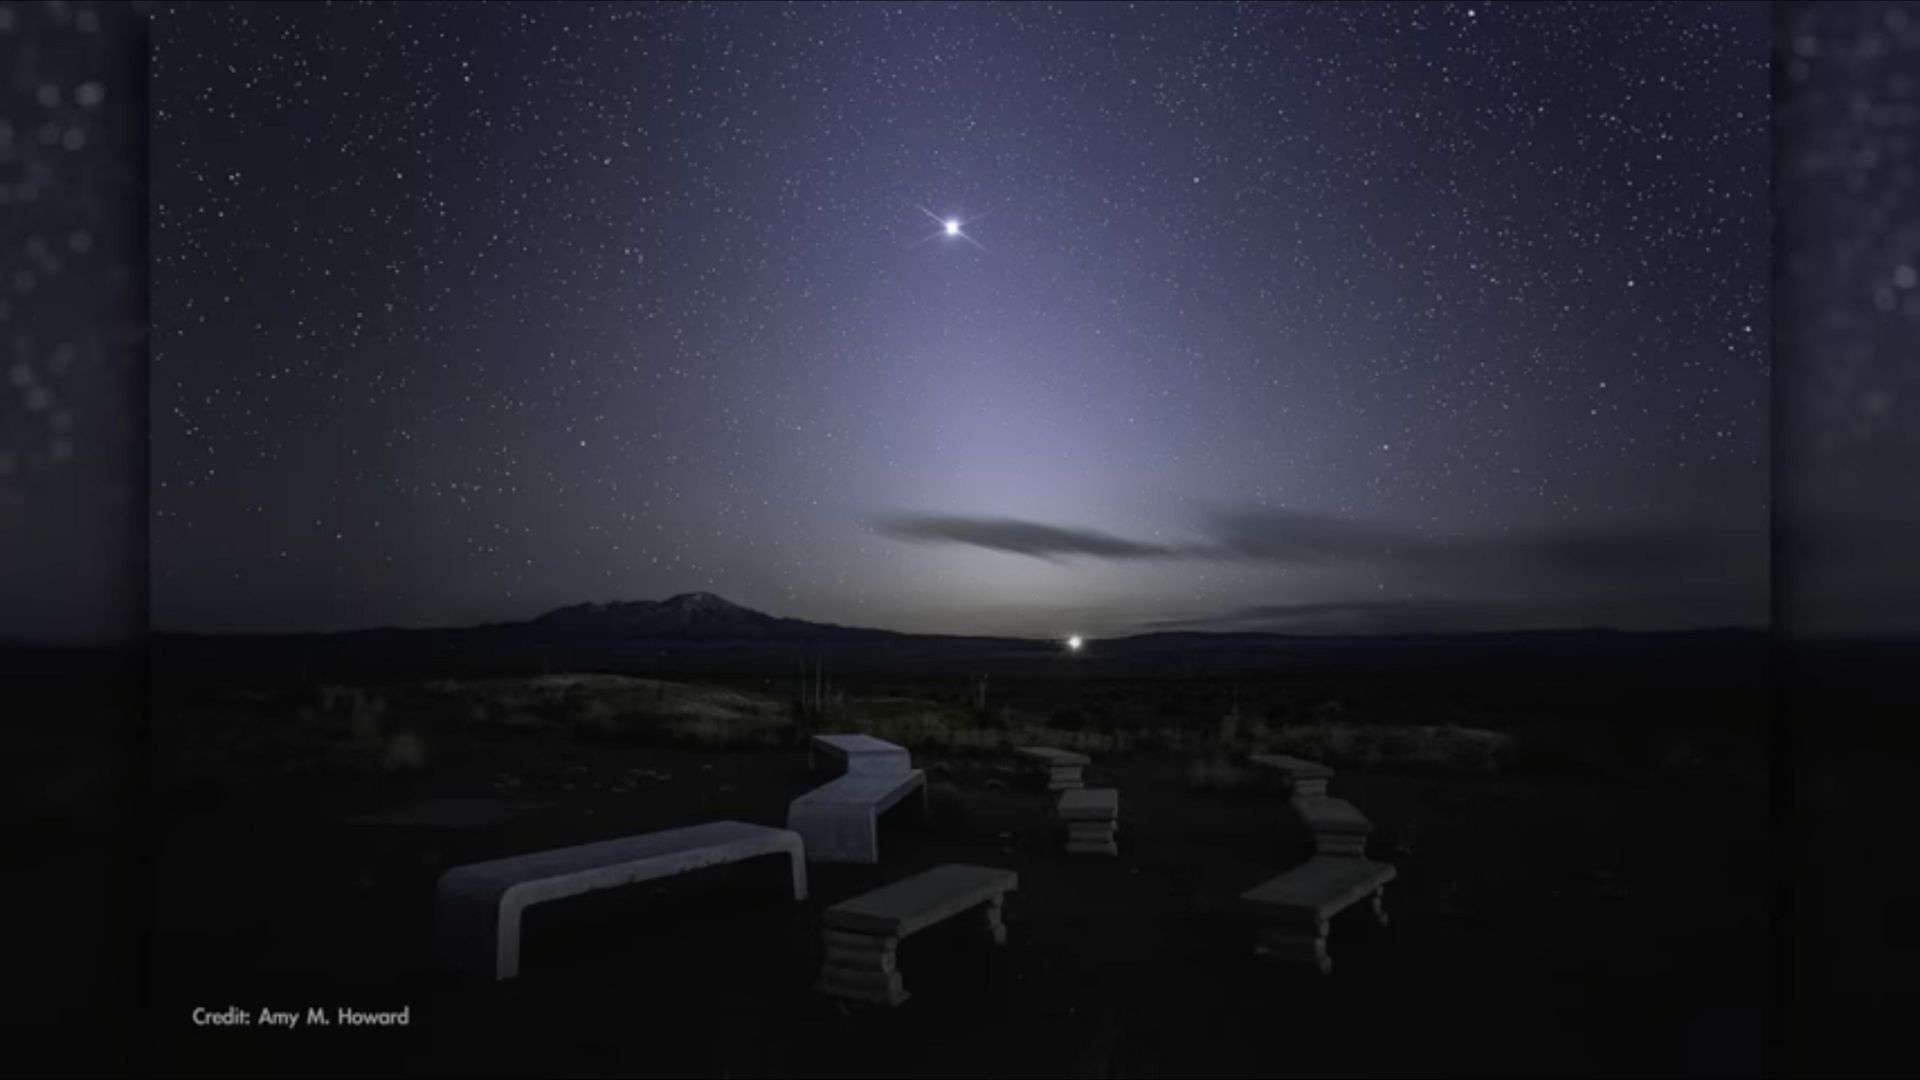 The ghostly zodiacal light stretches upward from the horizon